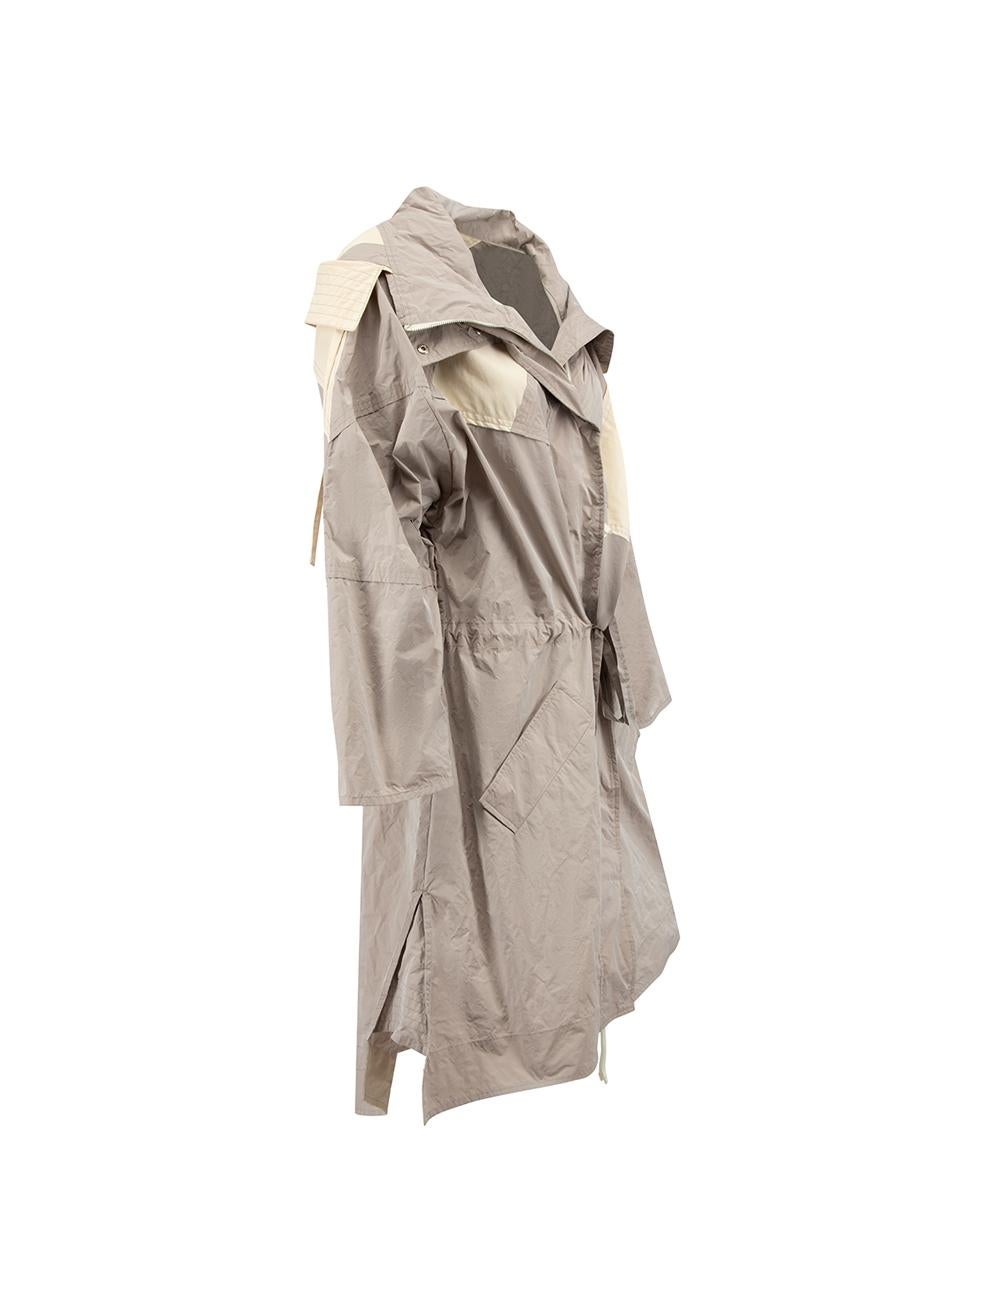 CONDITION is Never worn, with tags. No visible wear to coat is evident on this new Moncler Genius designer resale item.
  
  Details
  Grey
  Polyester
  1952 Freesia Long model
  Long raincoat
  Contrast panelled
  Hooded
  Front double zip closure